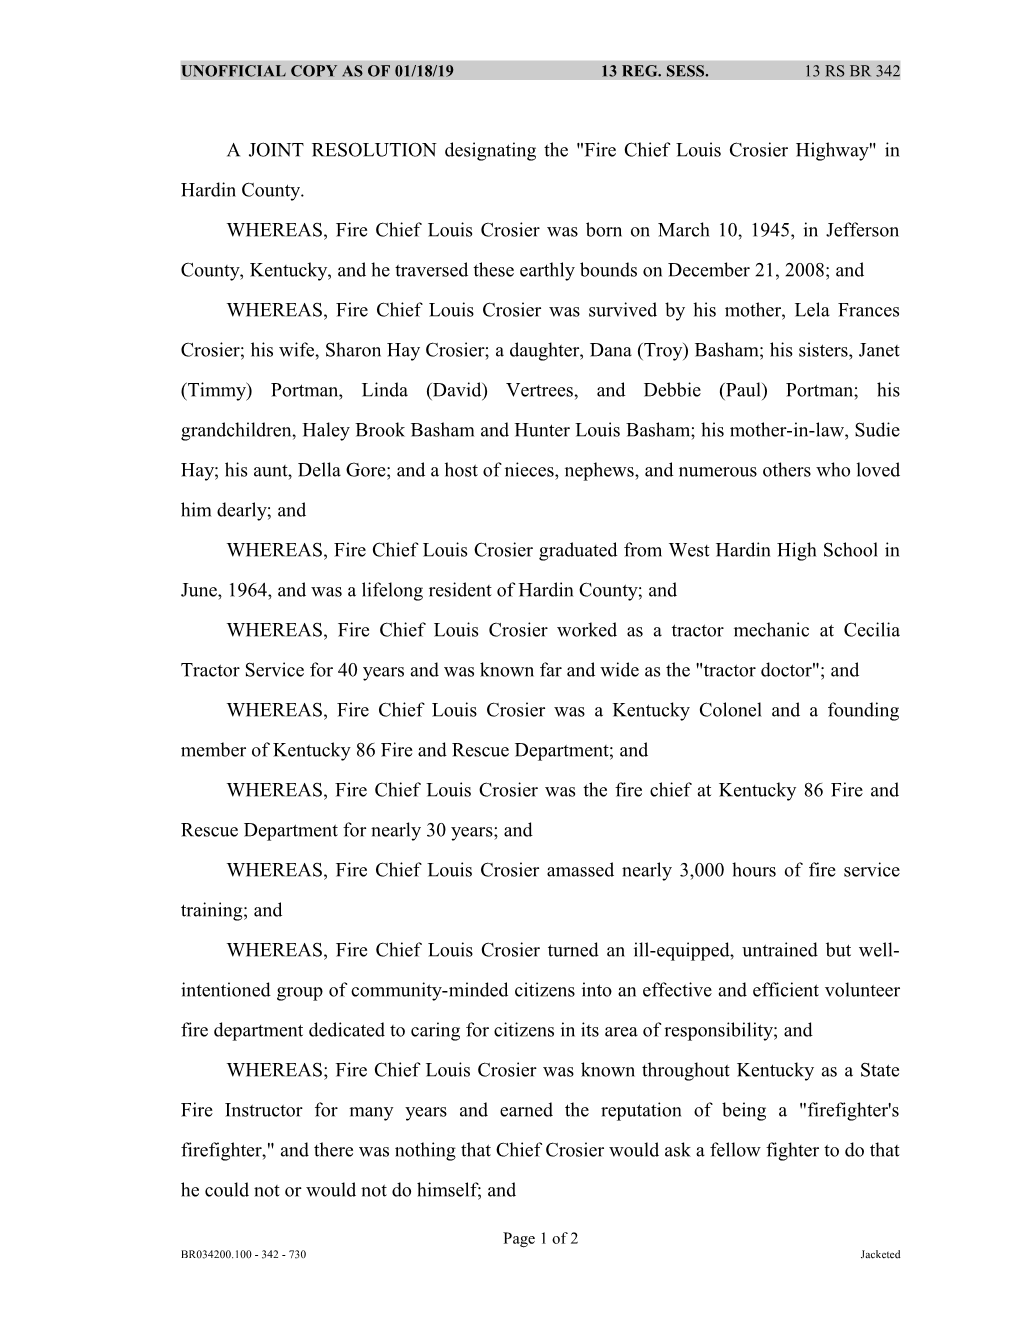 A JOINT RESOLUTION Designating the Fire Chief Louis Crosier Highway in Hardin County